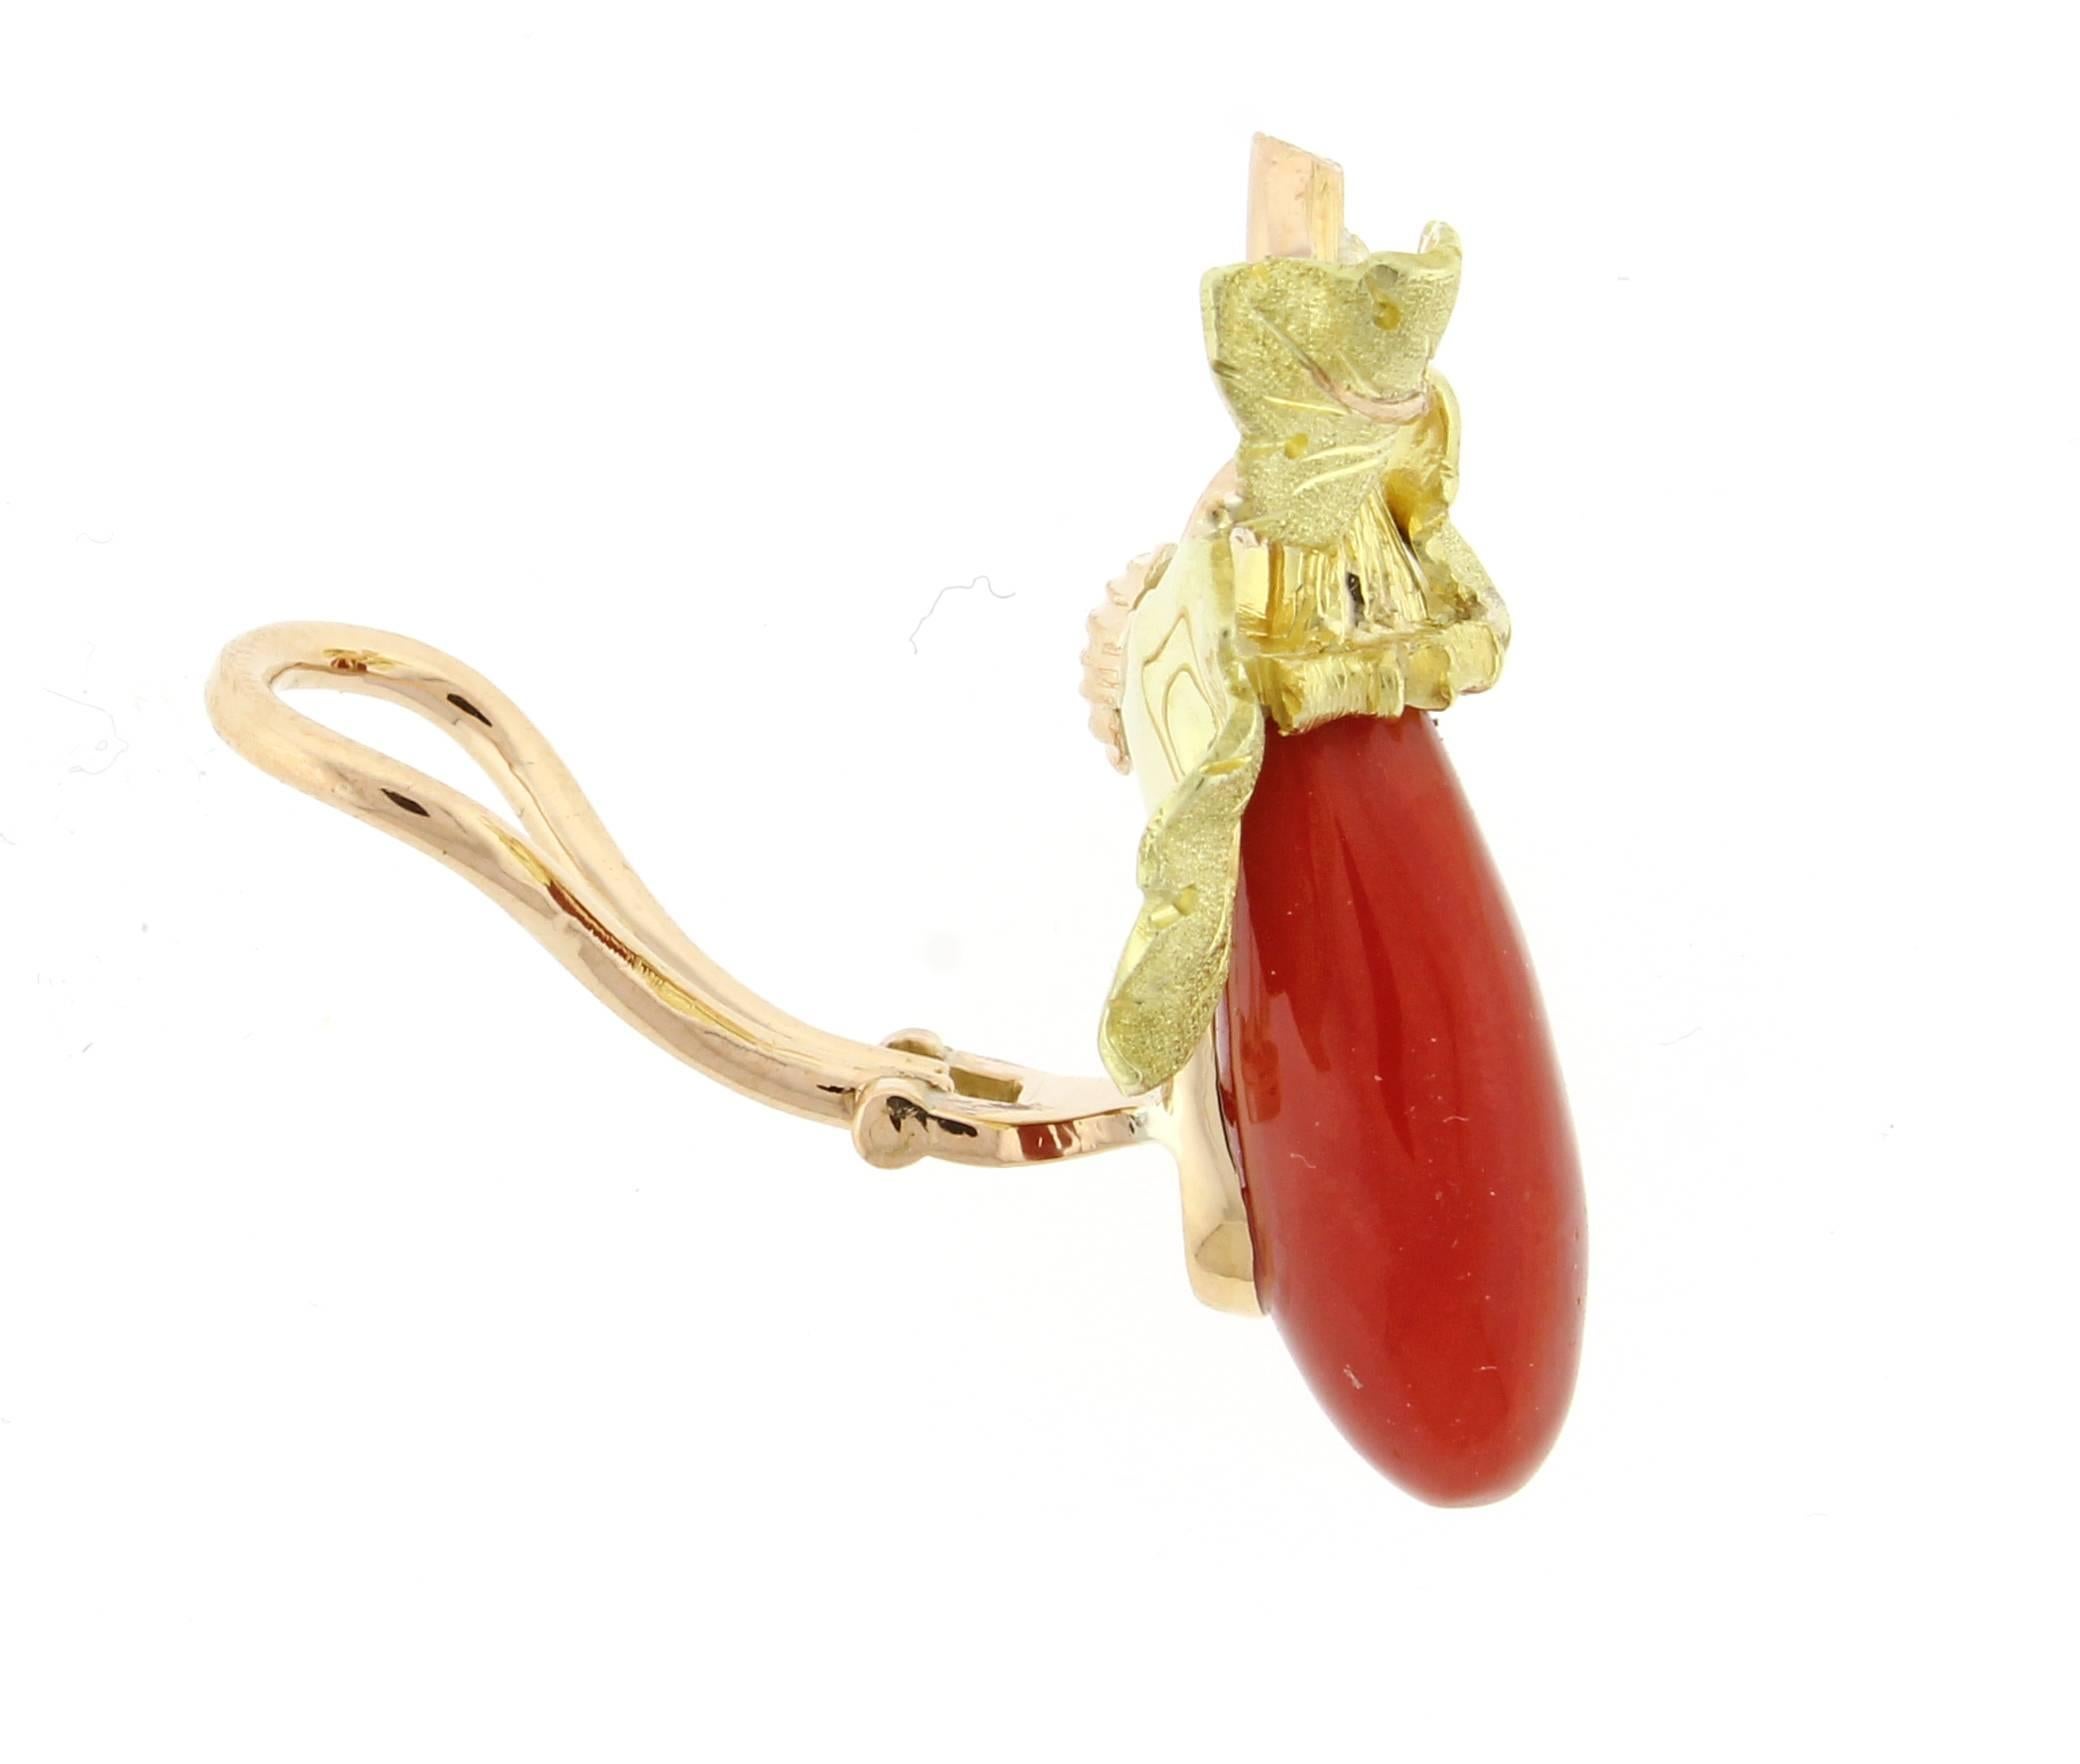 From Buccellati a  rare pair of  ox-blood coral oak leaf earrings. Three hand engraved 18 karat yellow gold leaves with pink gold veins form the earring's top that supports  the cabochon coral drops. The ox blood coral drops measure 18*9.5*6mm. The